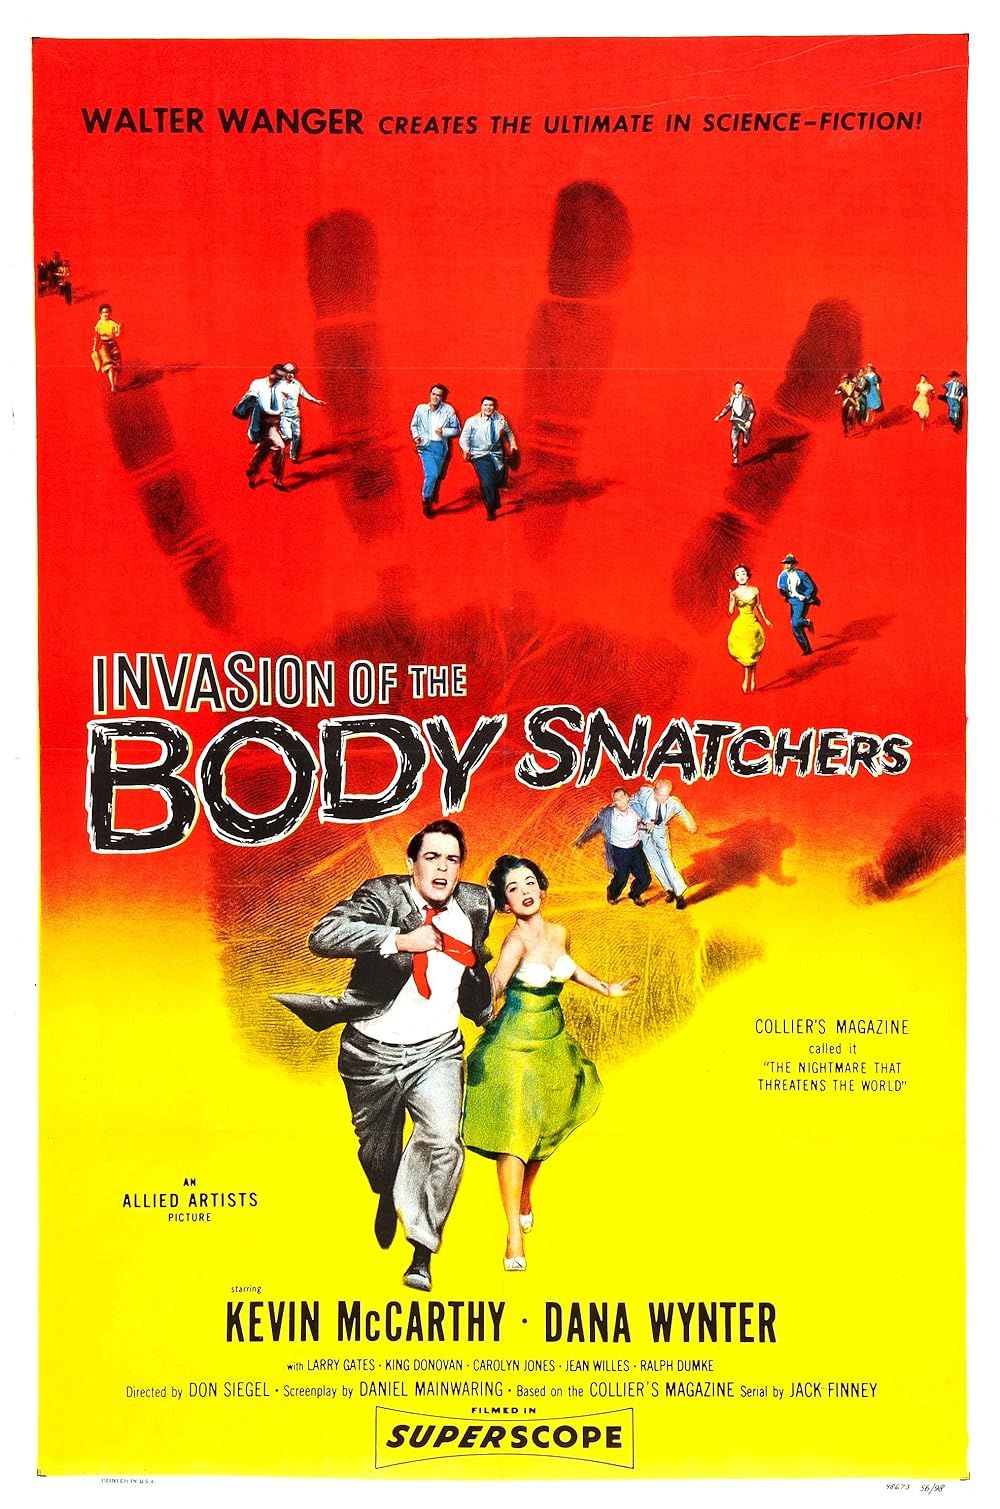 Kevin McCarthy and Dana Wynter run from various people on the Invasion of the Body Snatchers 1956 poster